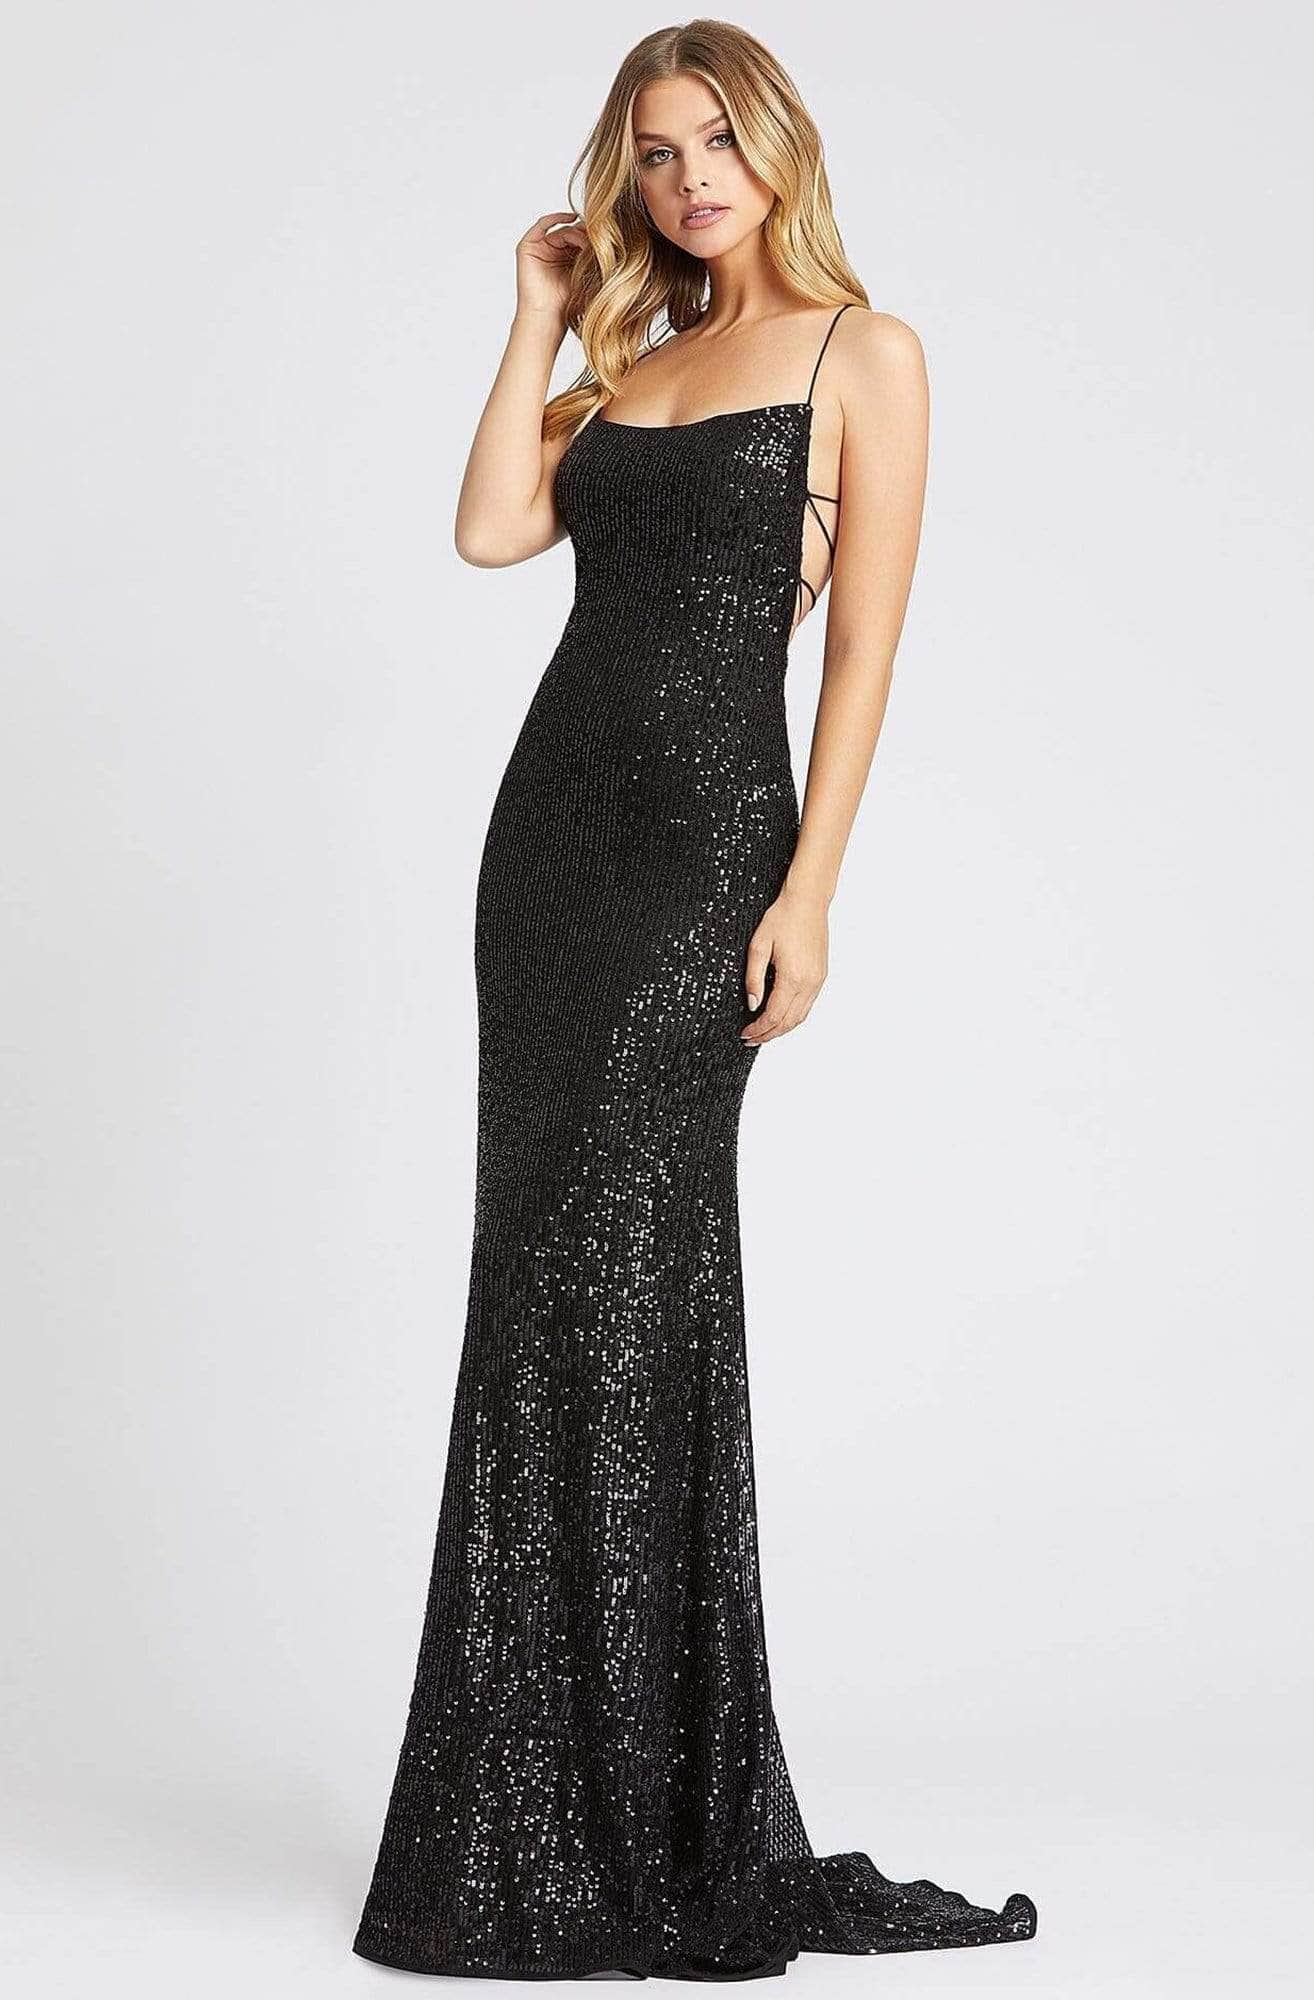 Ieena Duggal - 26269I Allover Sequin Strappy Open Back Gown
